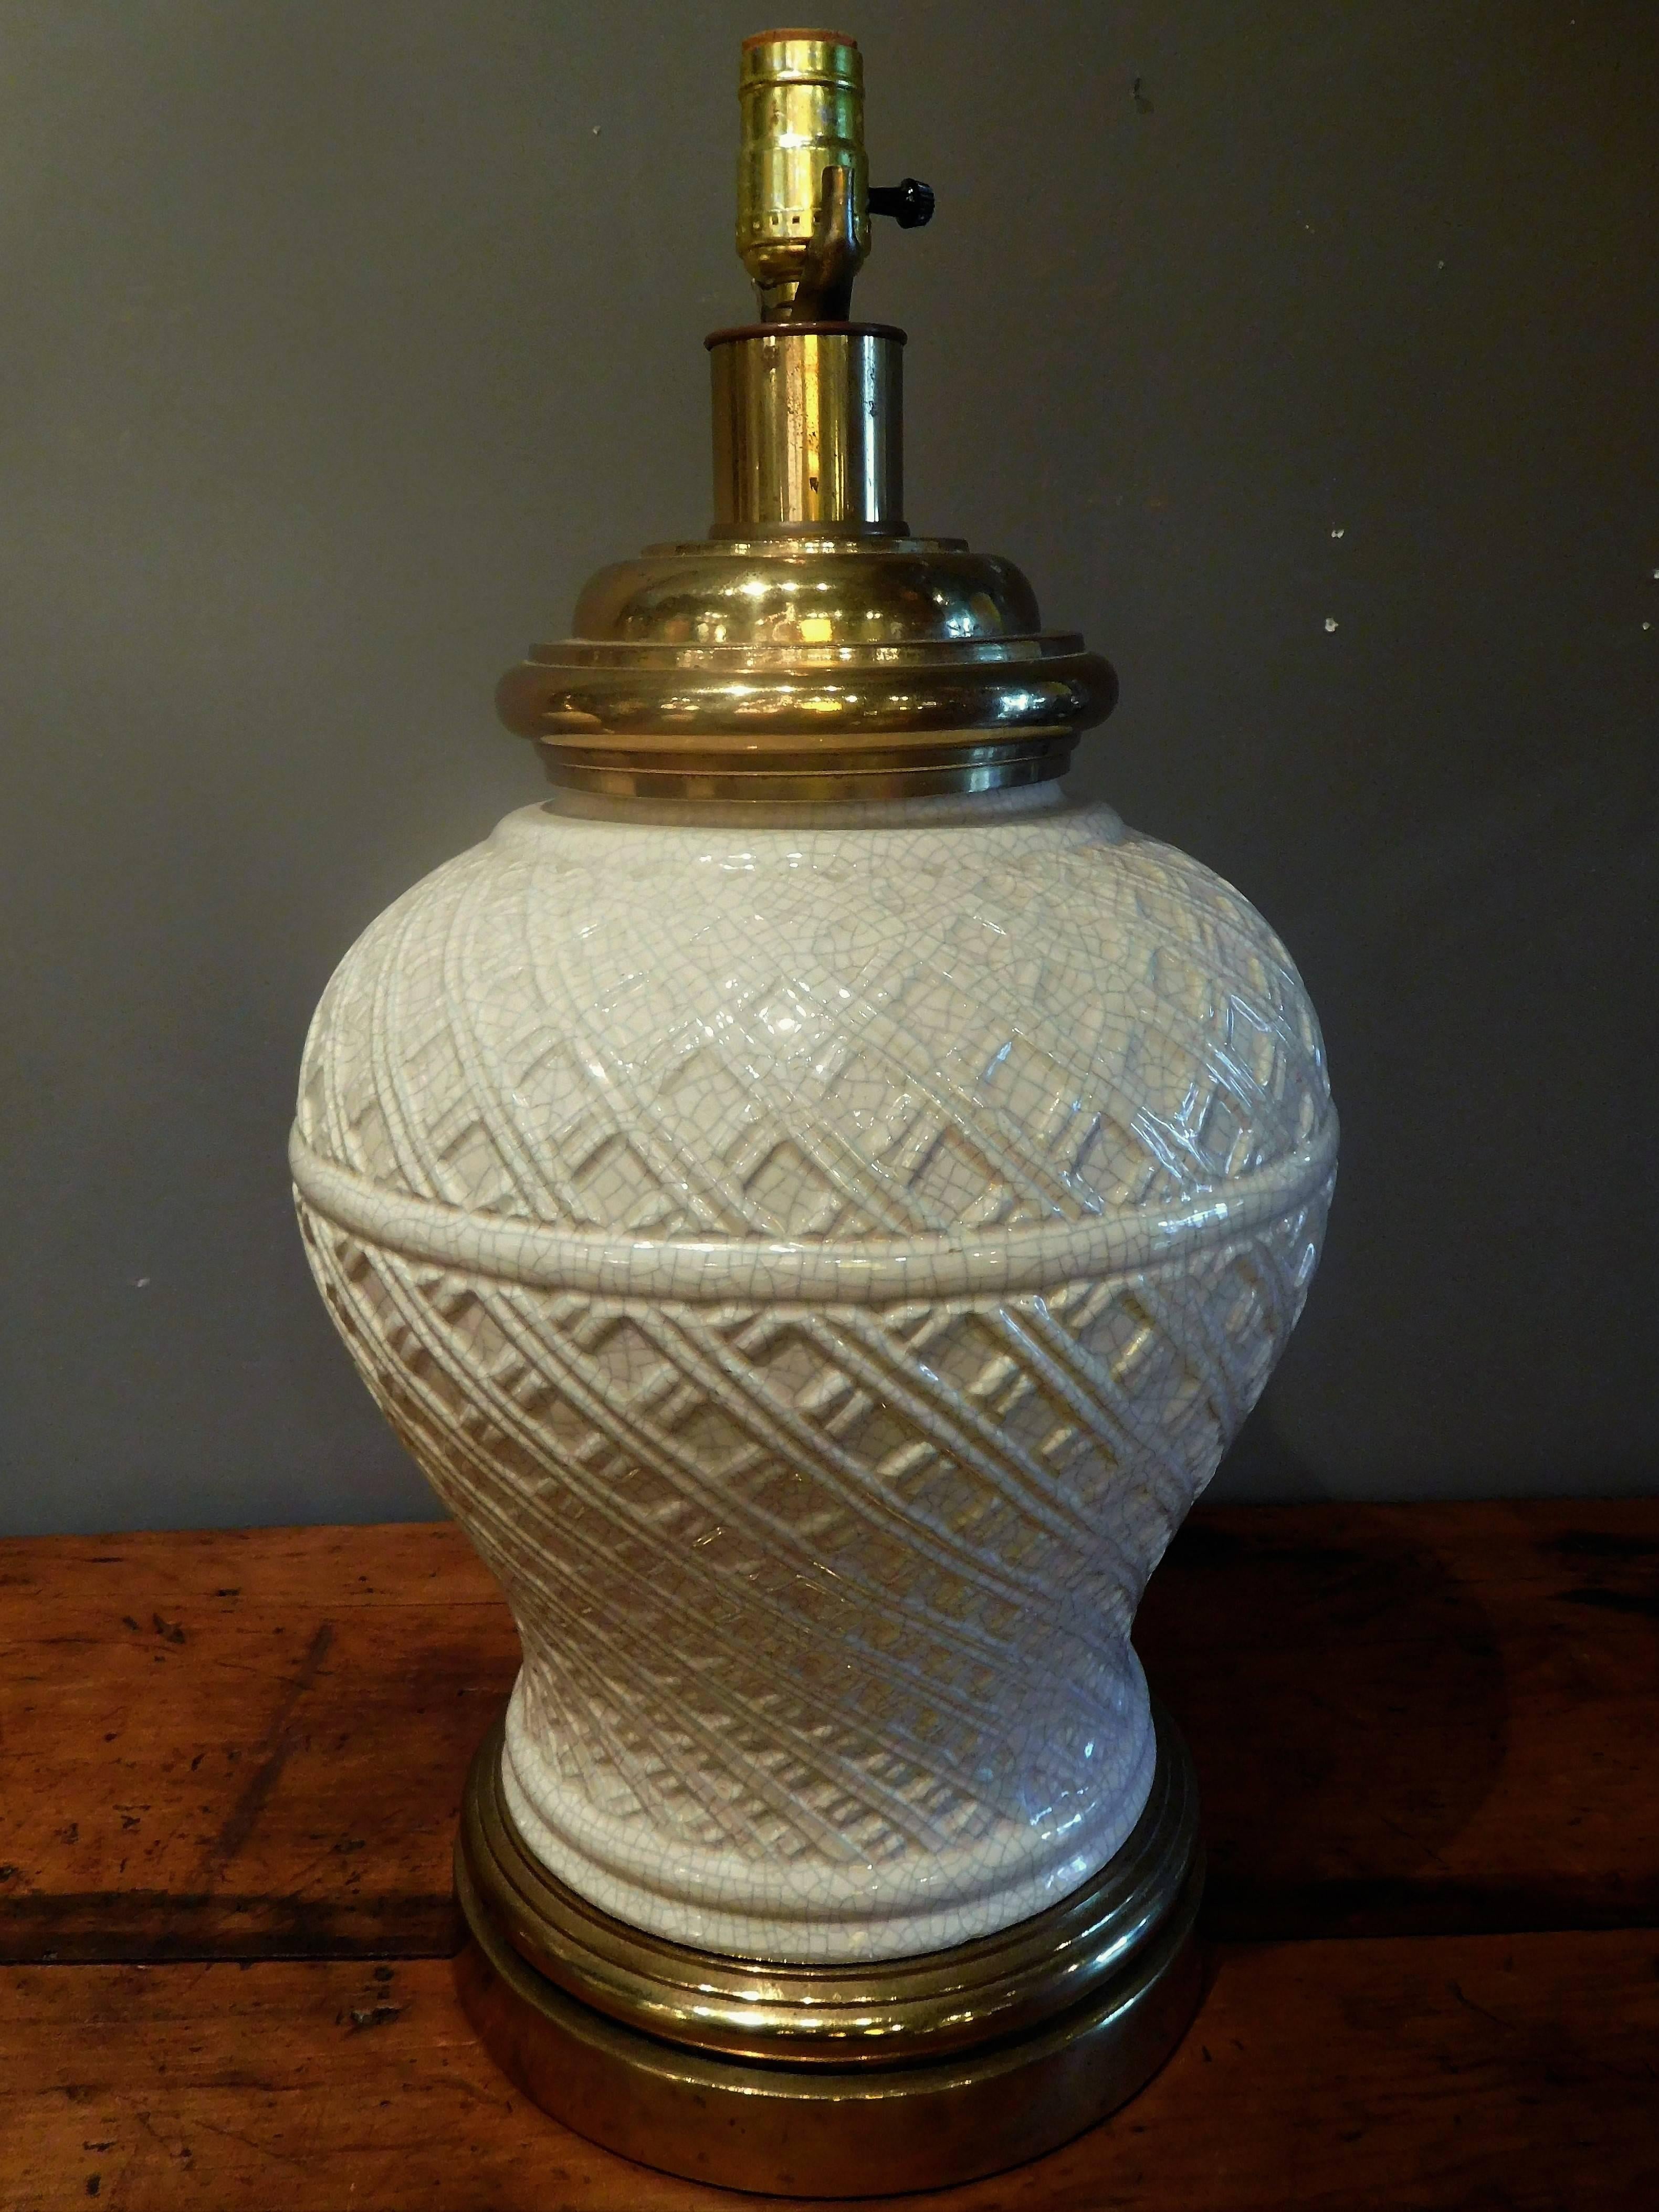 Mid-Century Modern Pair of Ceramic Basket-Weave Paul Hanson Lamps with Ivory Crackle Glaze, 1955 For Sale